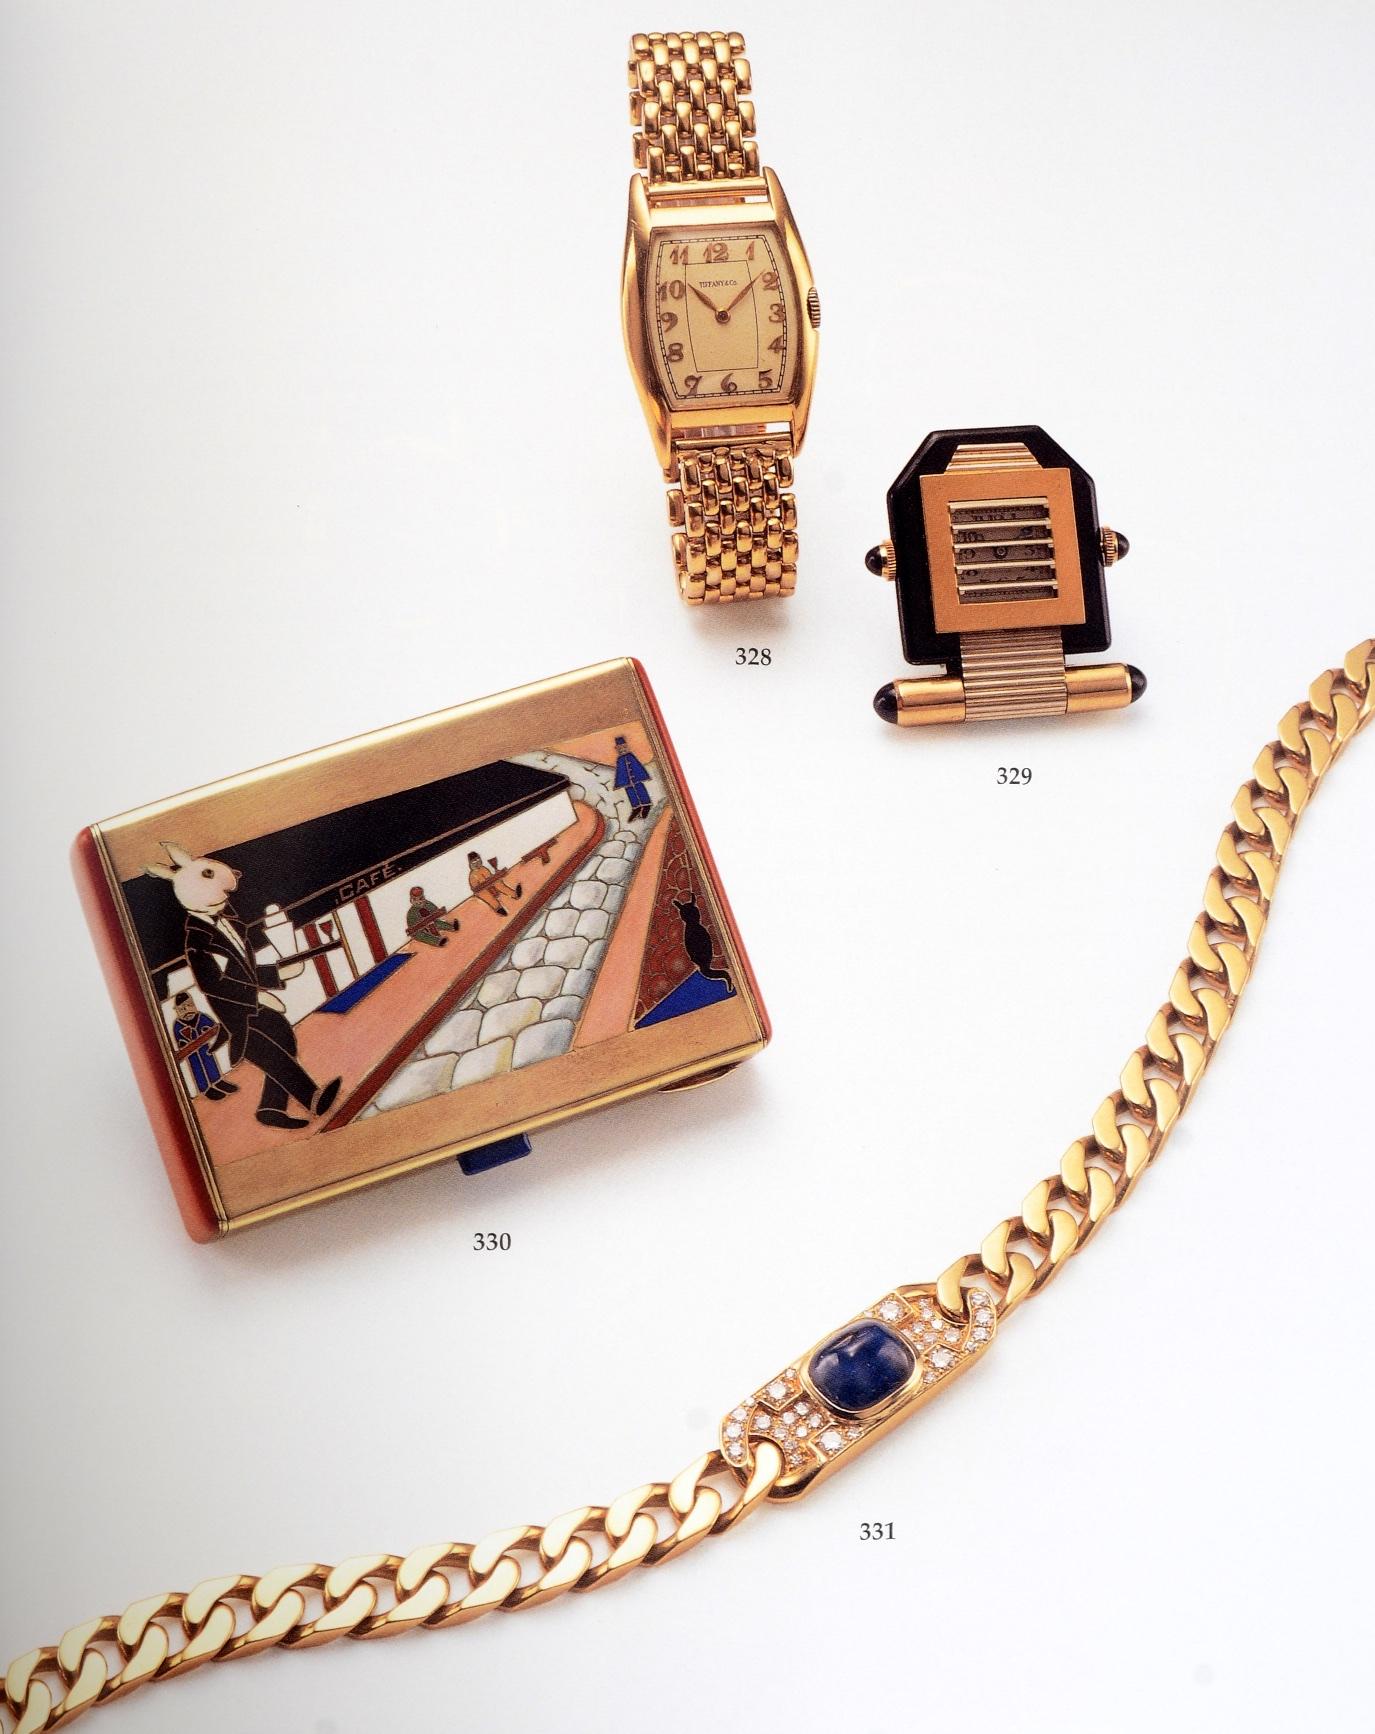 Fine Jewels and Watches. Sotheby's Sale 7312, Los Angeles, May 4, 1999 For Sale 1